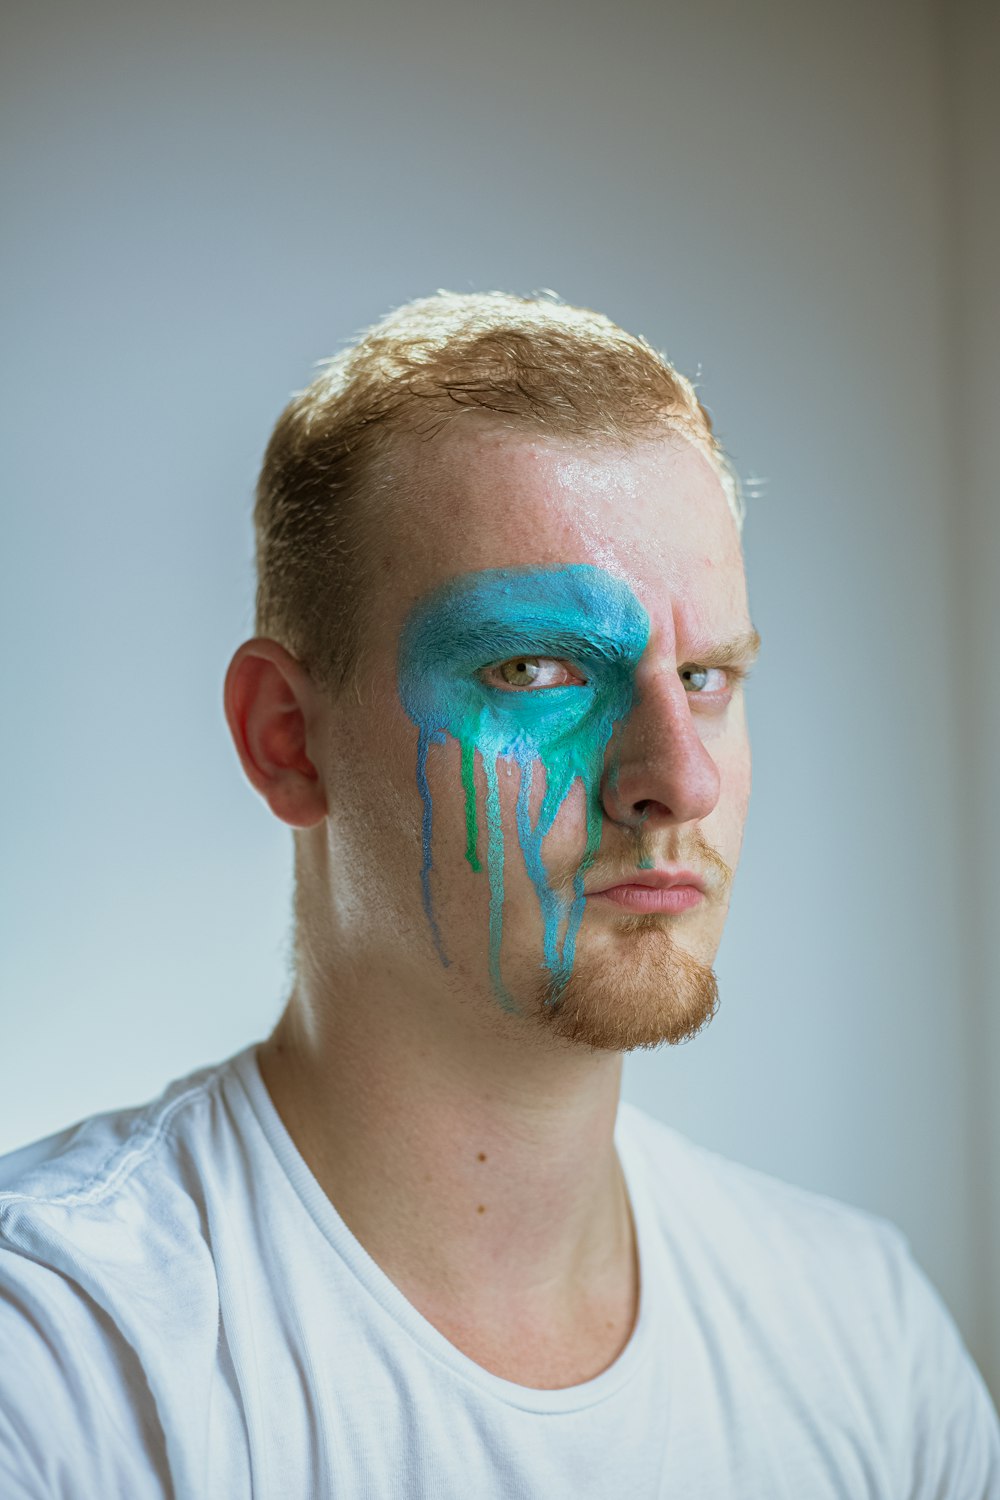 man white crew neck shirt with blue green and red face paint photo – Free Human Image on Unsplash